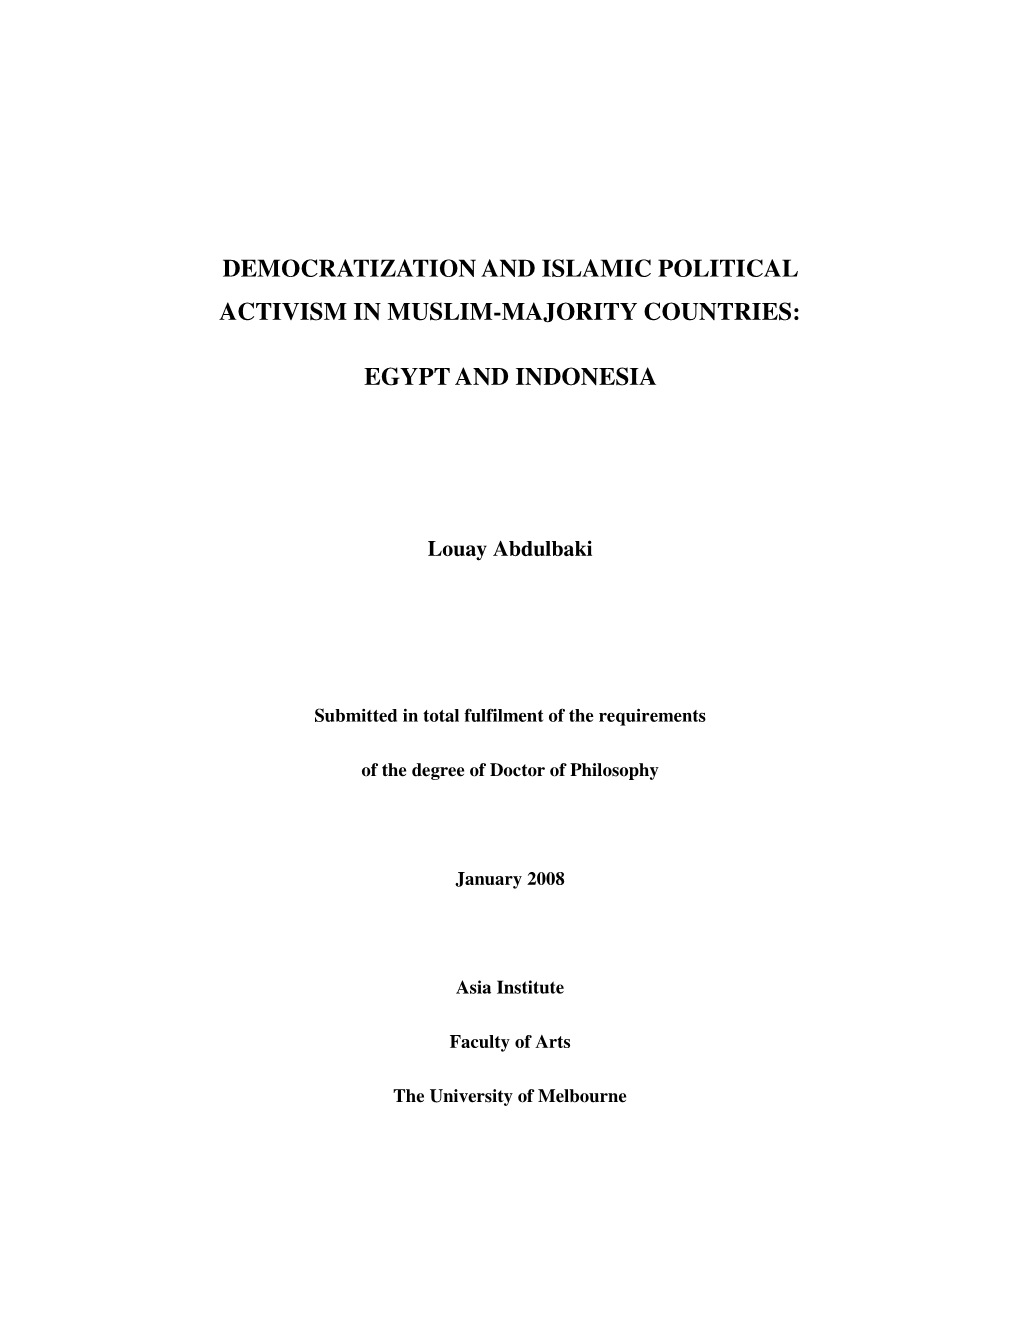 Democratization and Islamic Political Activism in Muslim-Majority Countries